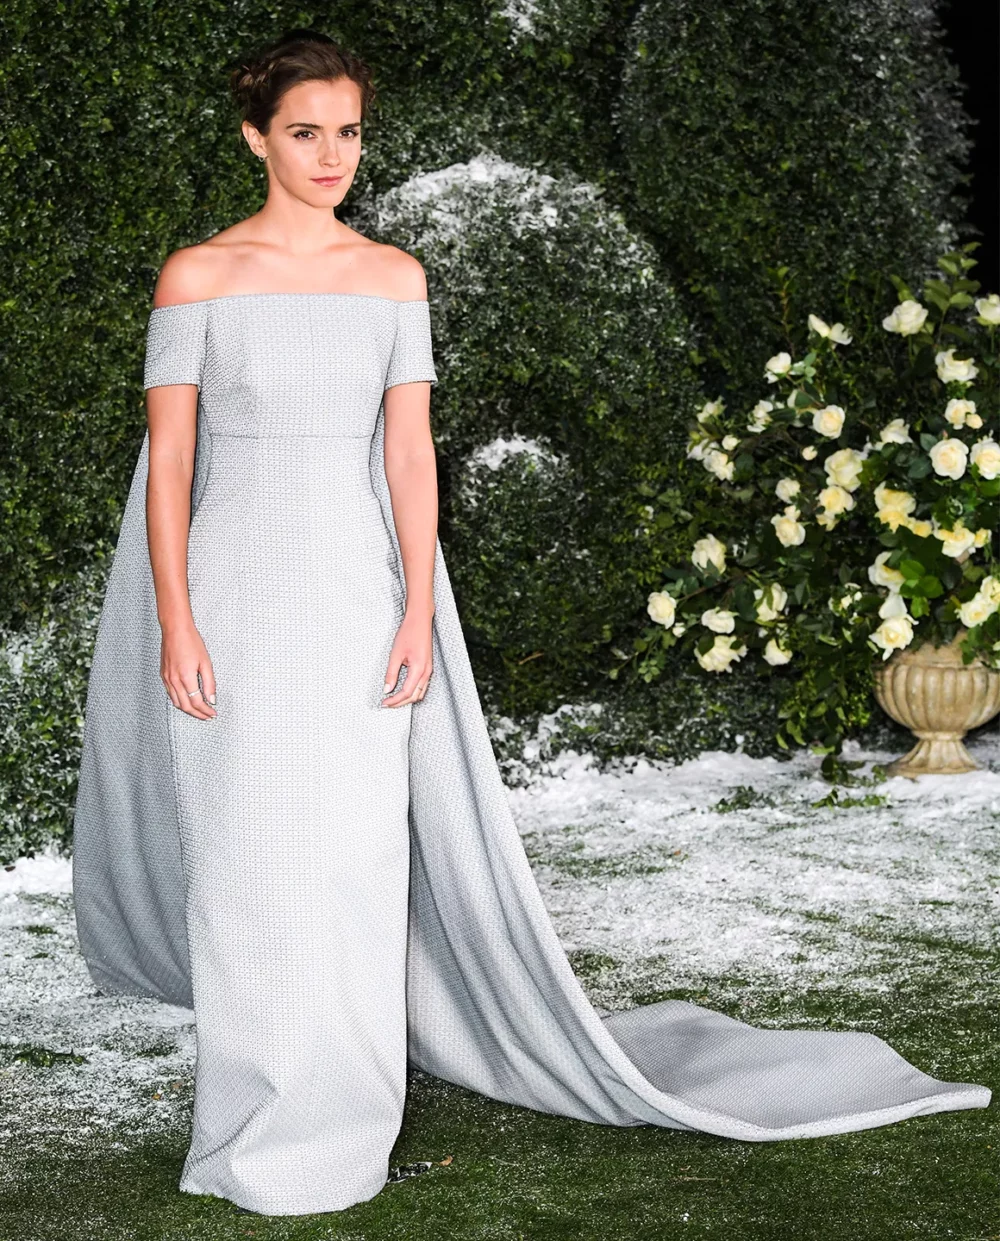 This fanciful floor length Emma outfit is all a girl could want.